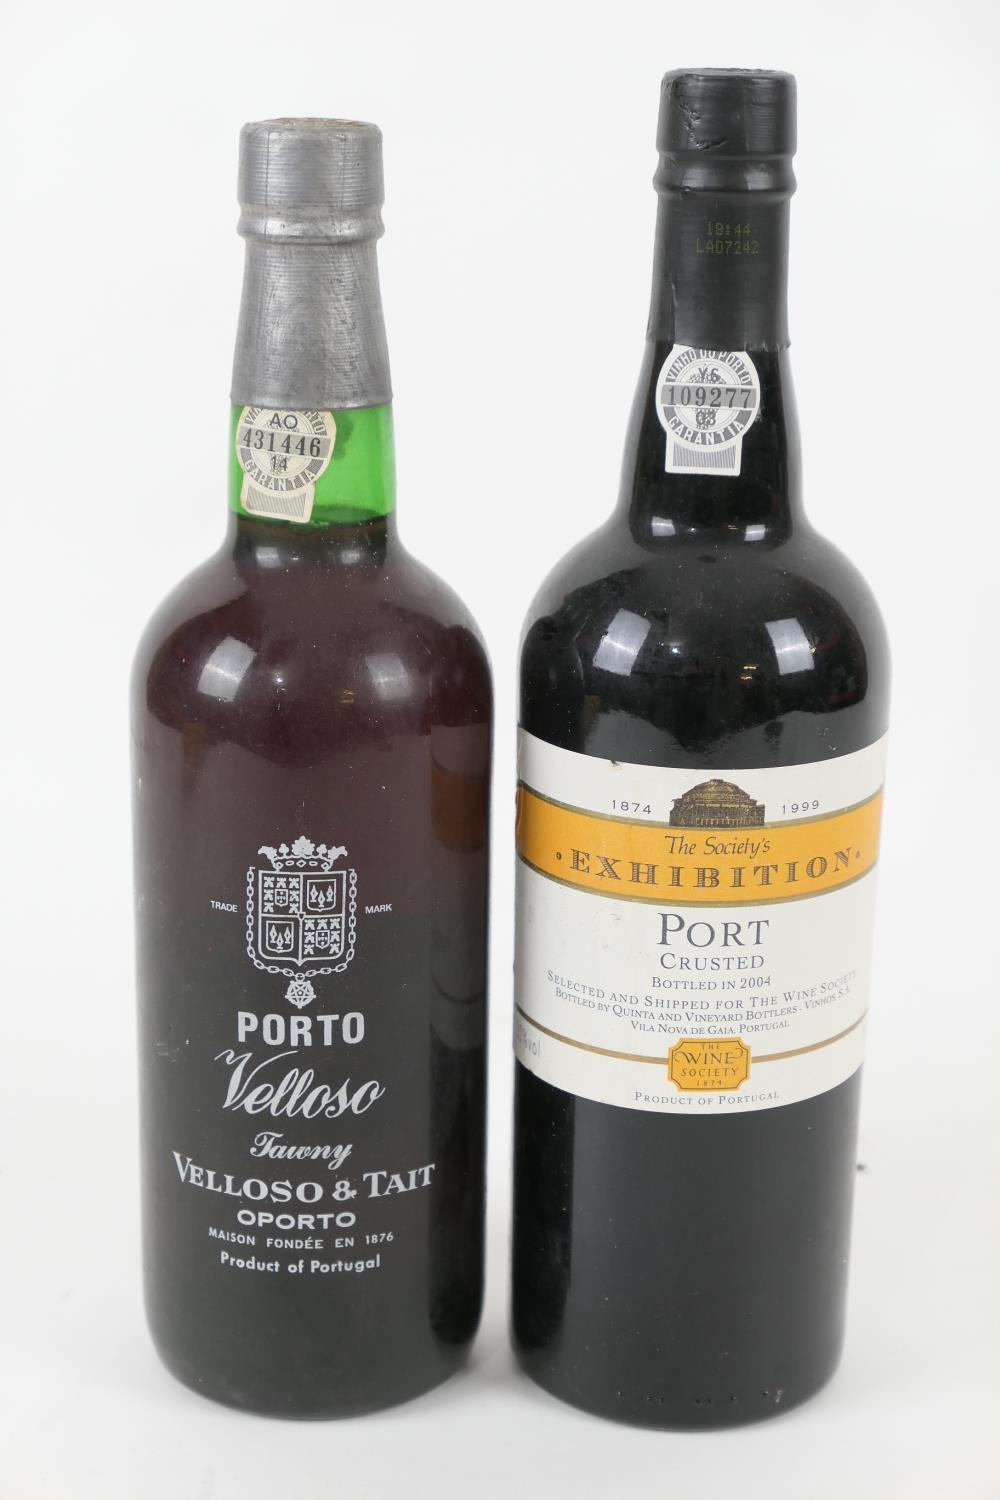 Pierre Laforest tawny port, 19% Vol, level lower neck; also Wine Society's Exhibition crusted